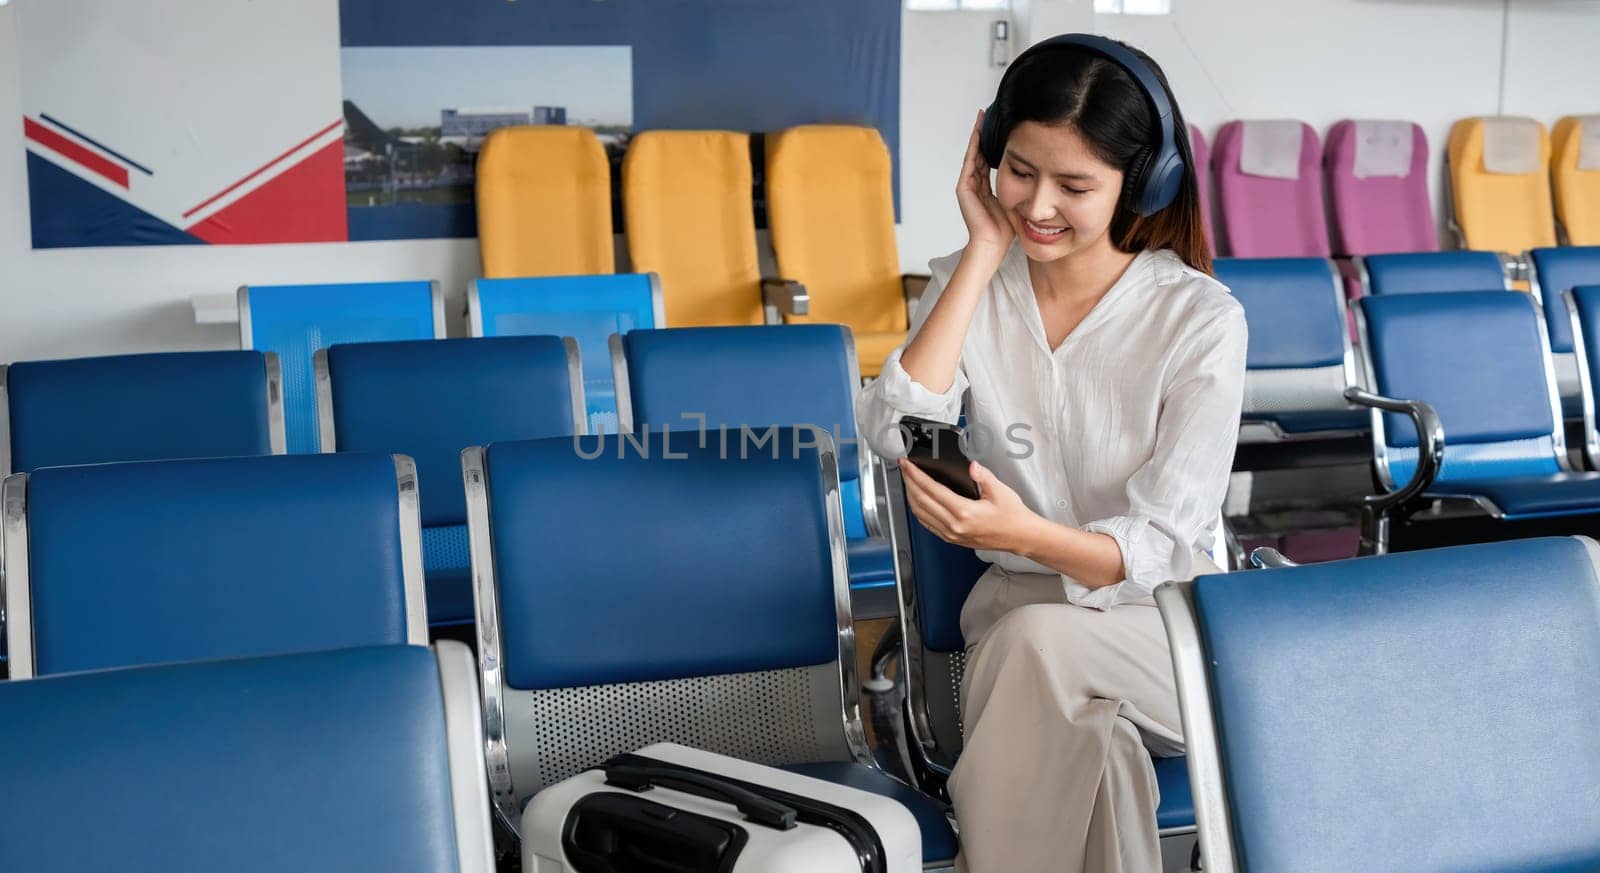 Asian woman listening to music on smartphone in airport waiting area. Concept of travel, technology, and relaxation by wichayada